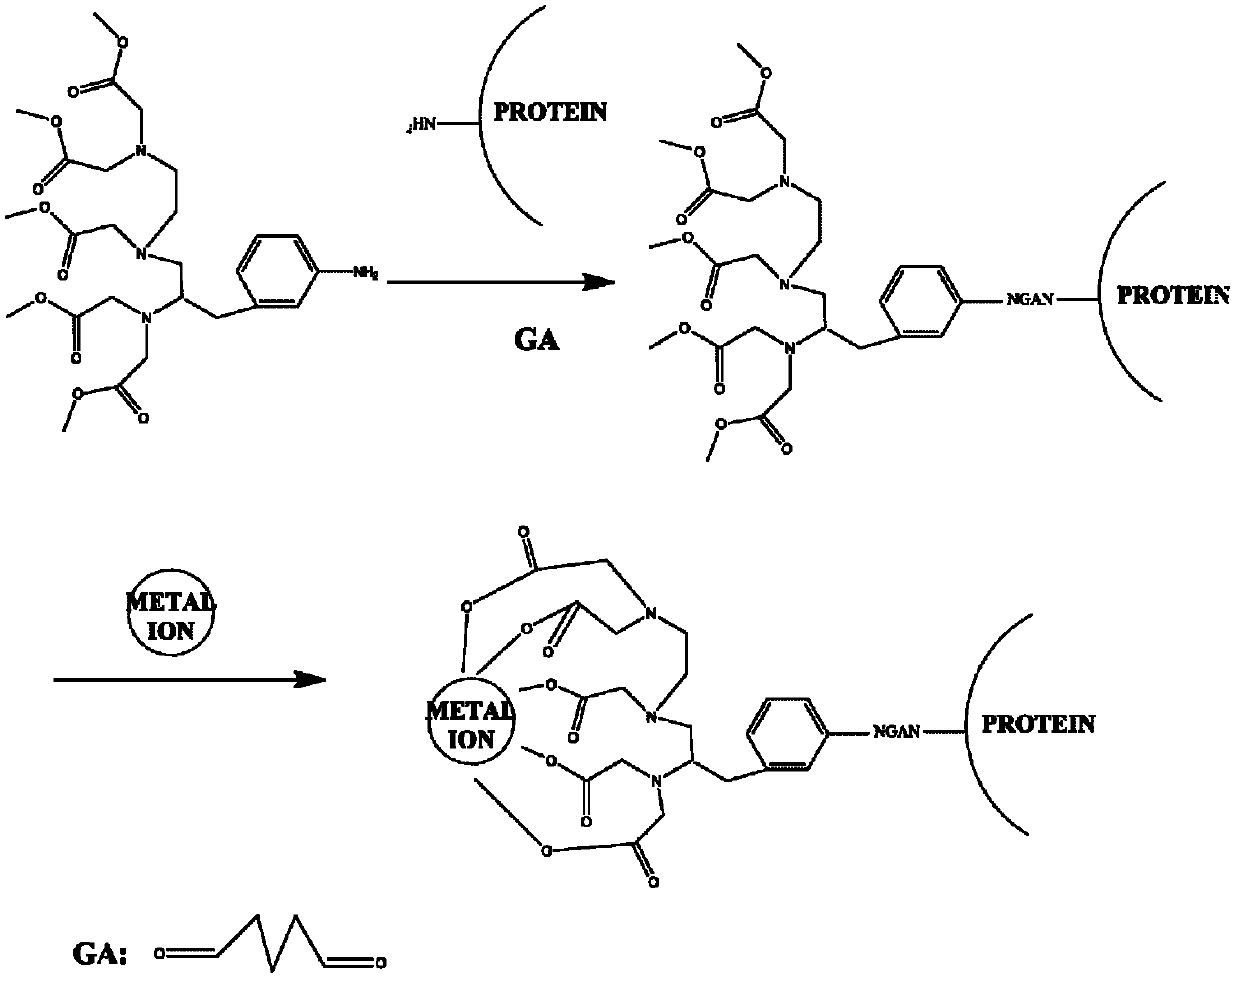 Synthesis and application method of antigens for various heavy metals